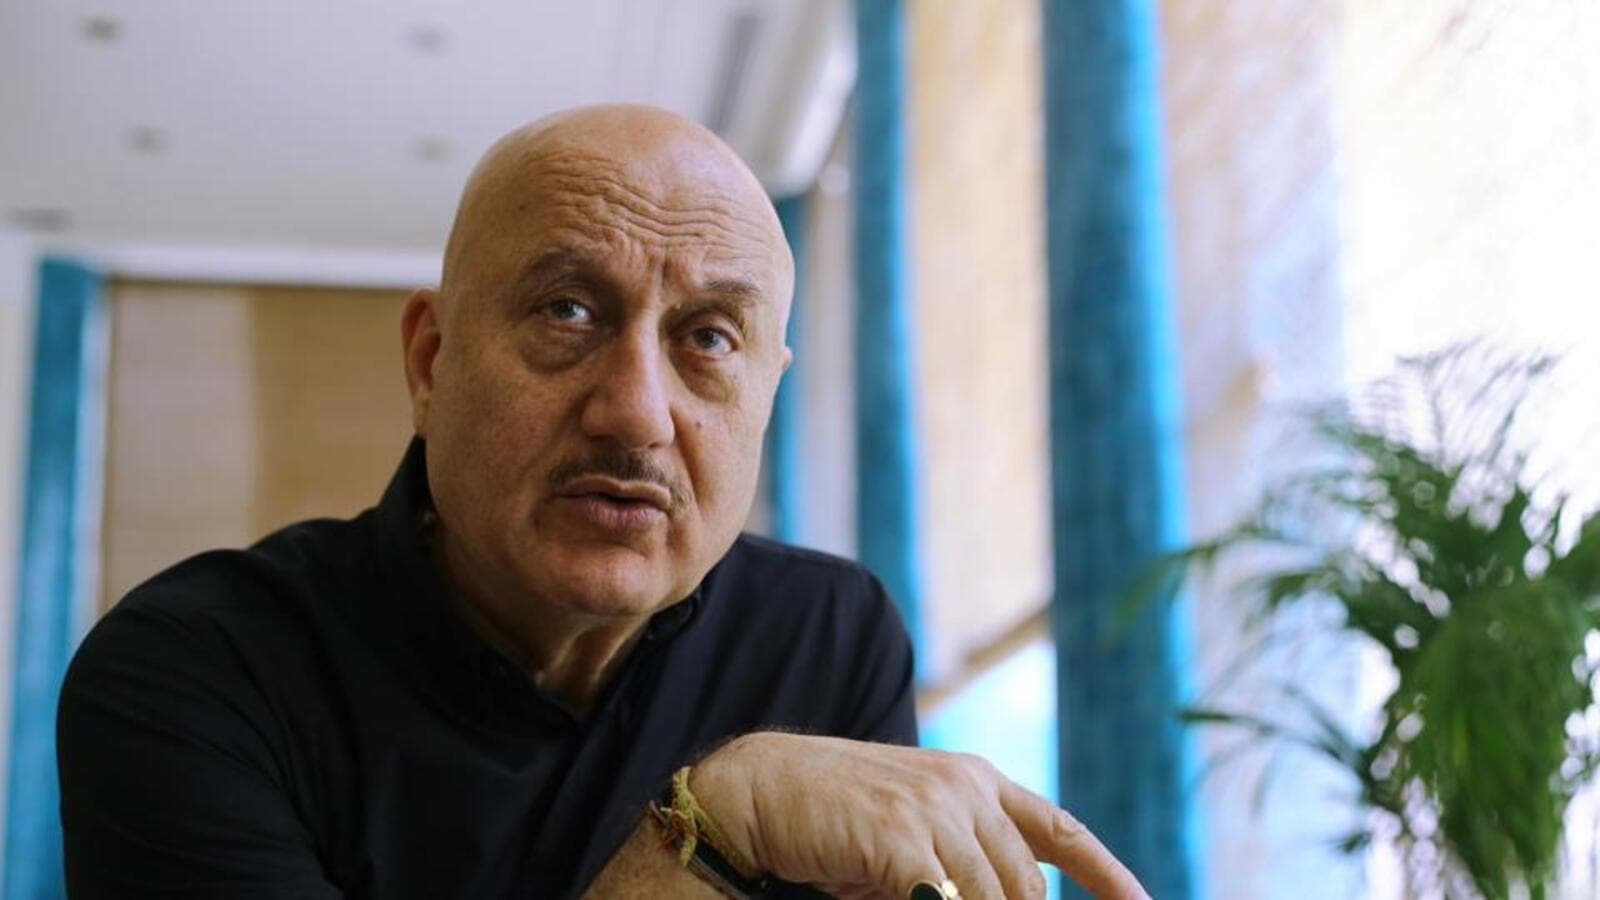 Anupam Kher on massive success of The Kashmir Files: We had given up hope about cinema